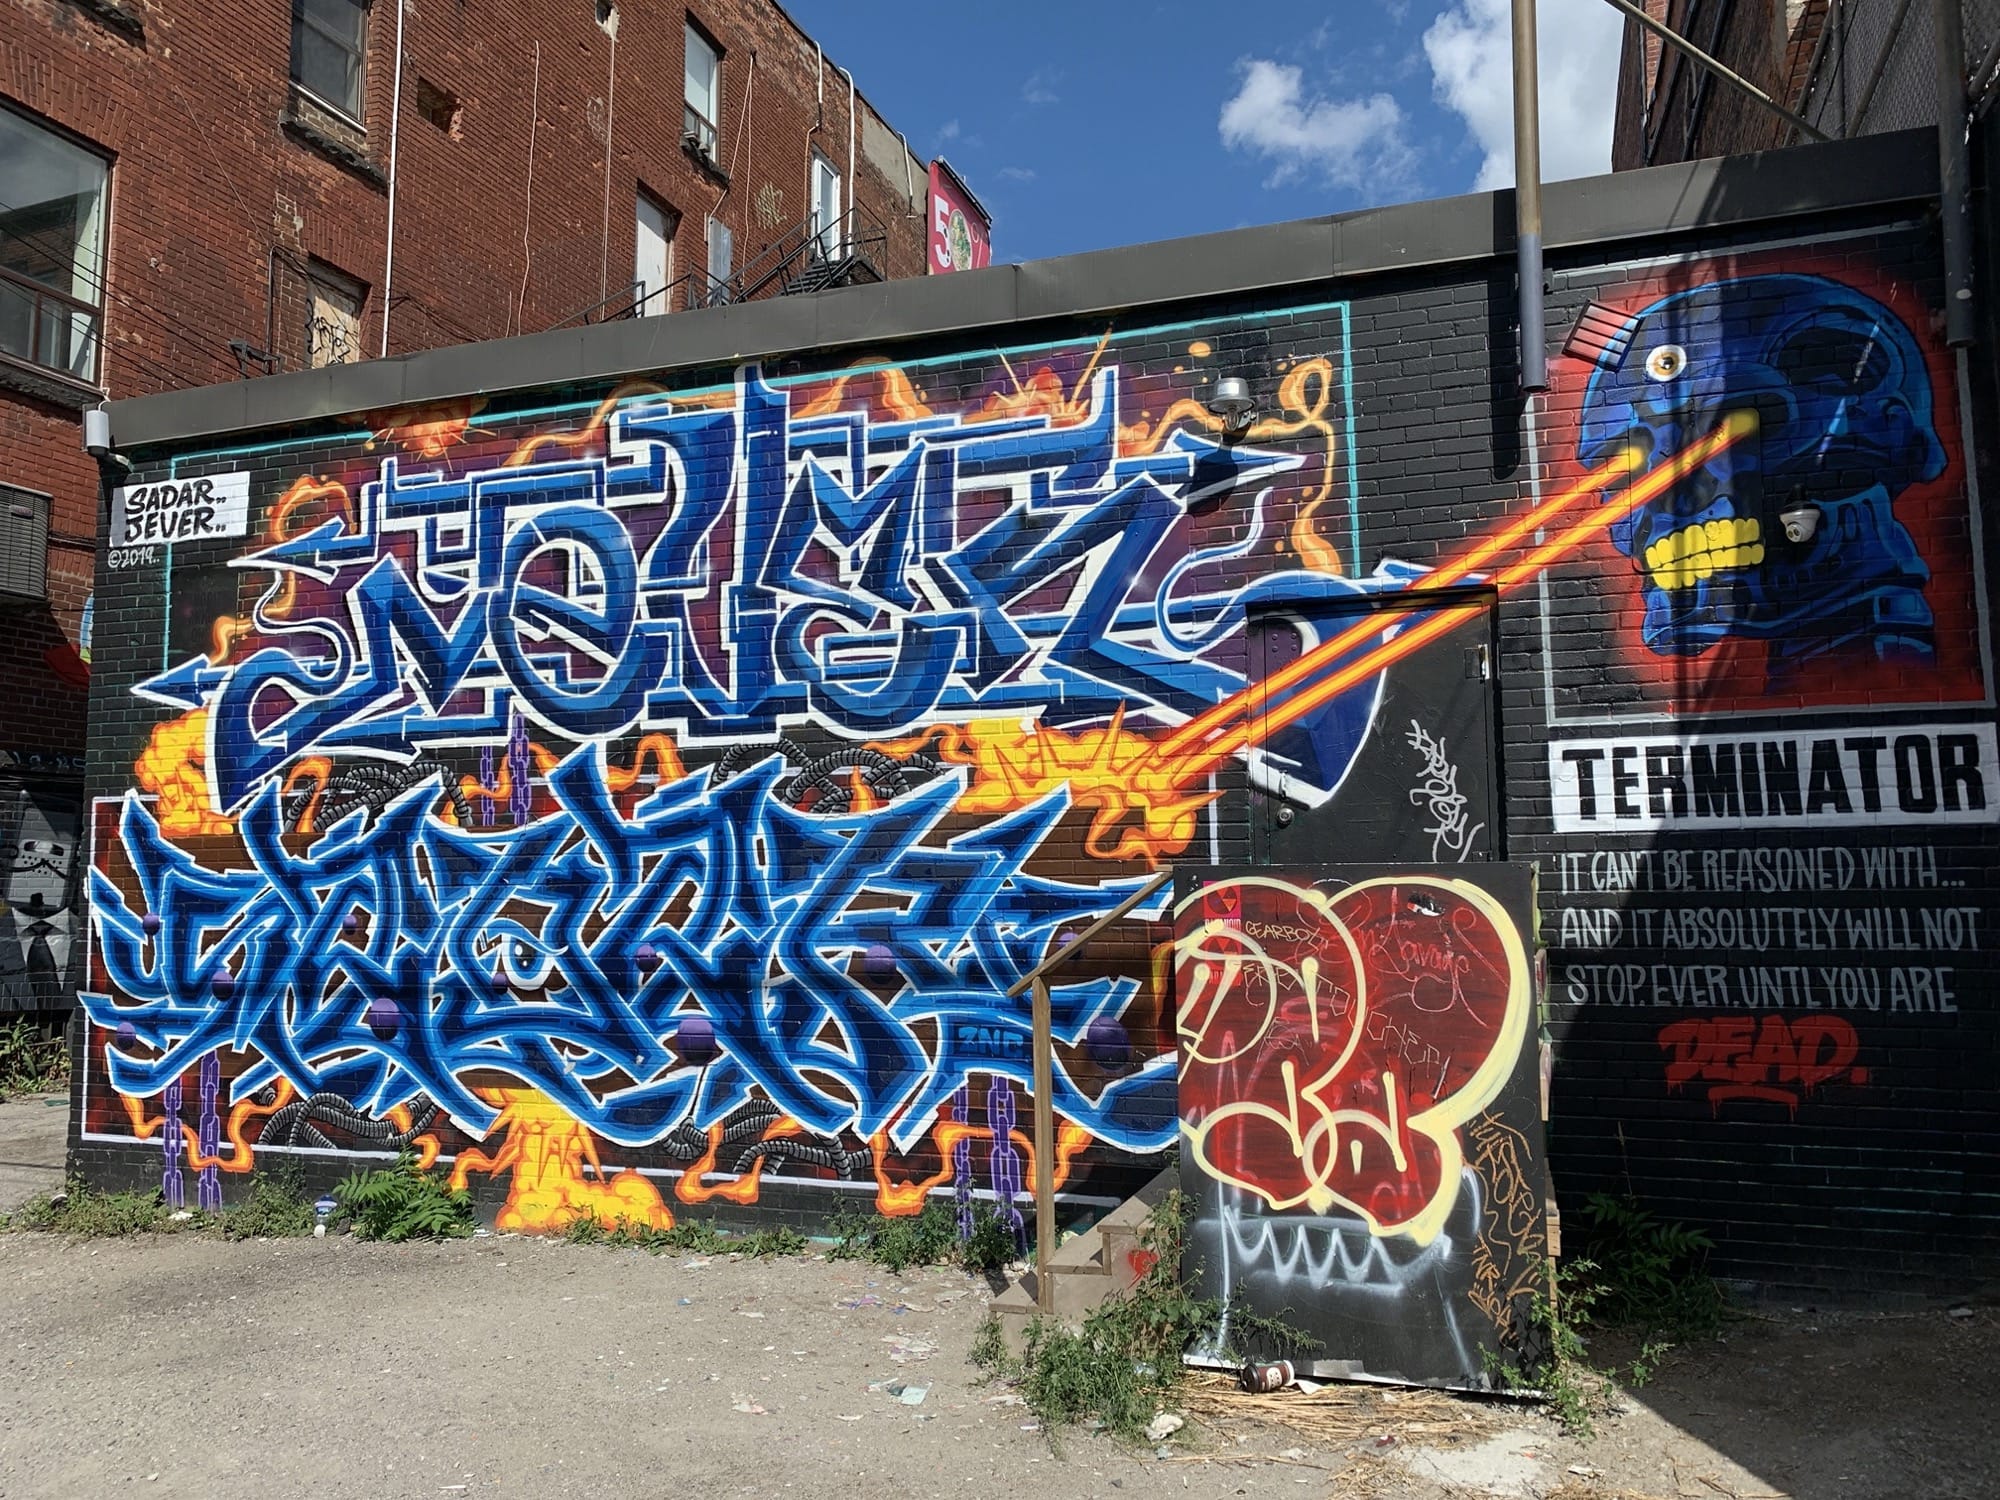 Graffiti 2518  captured by Rabot in Toronto Canada